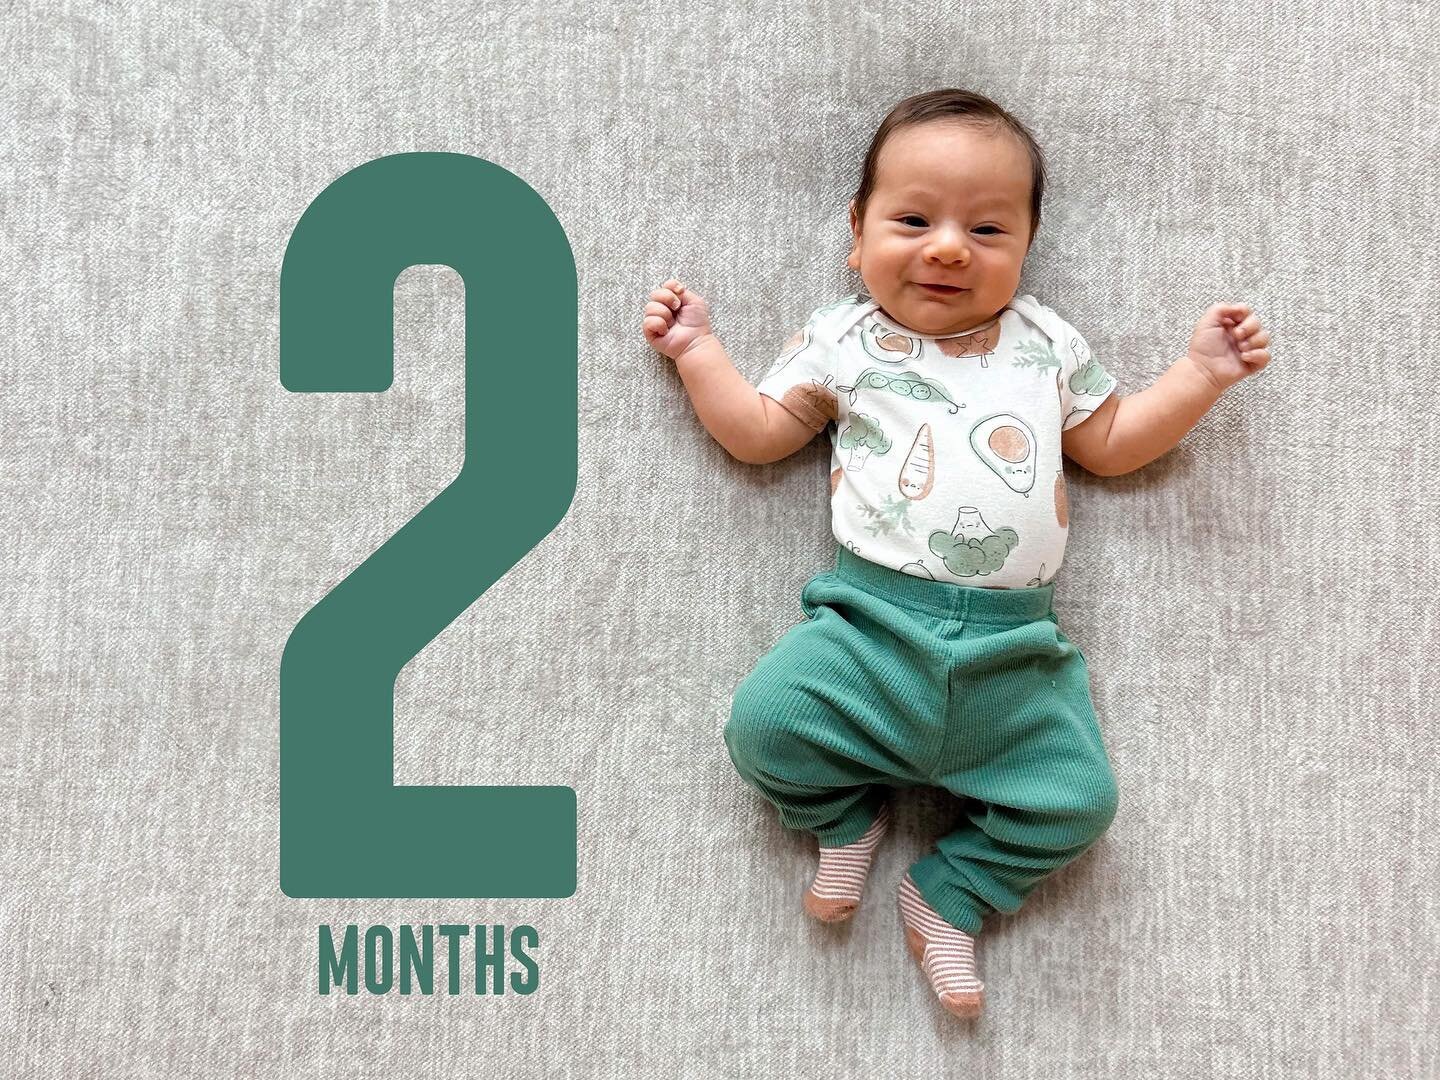 2️⃣ MONTHS with our #TravyRow and he&rsquo;s the best guy I know! &hellip;filling in nicely and in the 99th percentile for height! 🤍 Love him so much! #ARZ2023 #TravRowMILESTONES